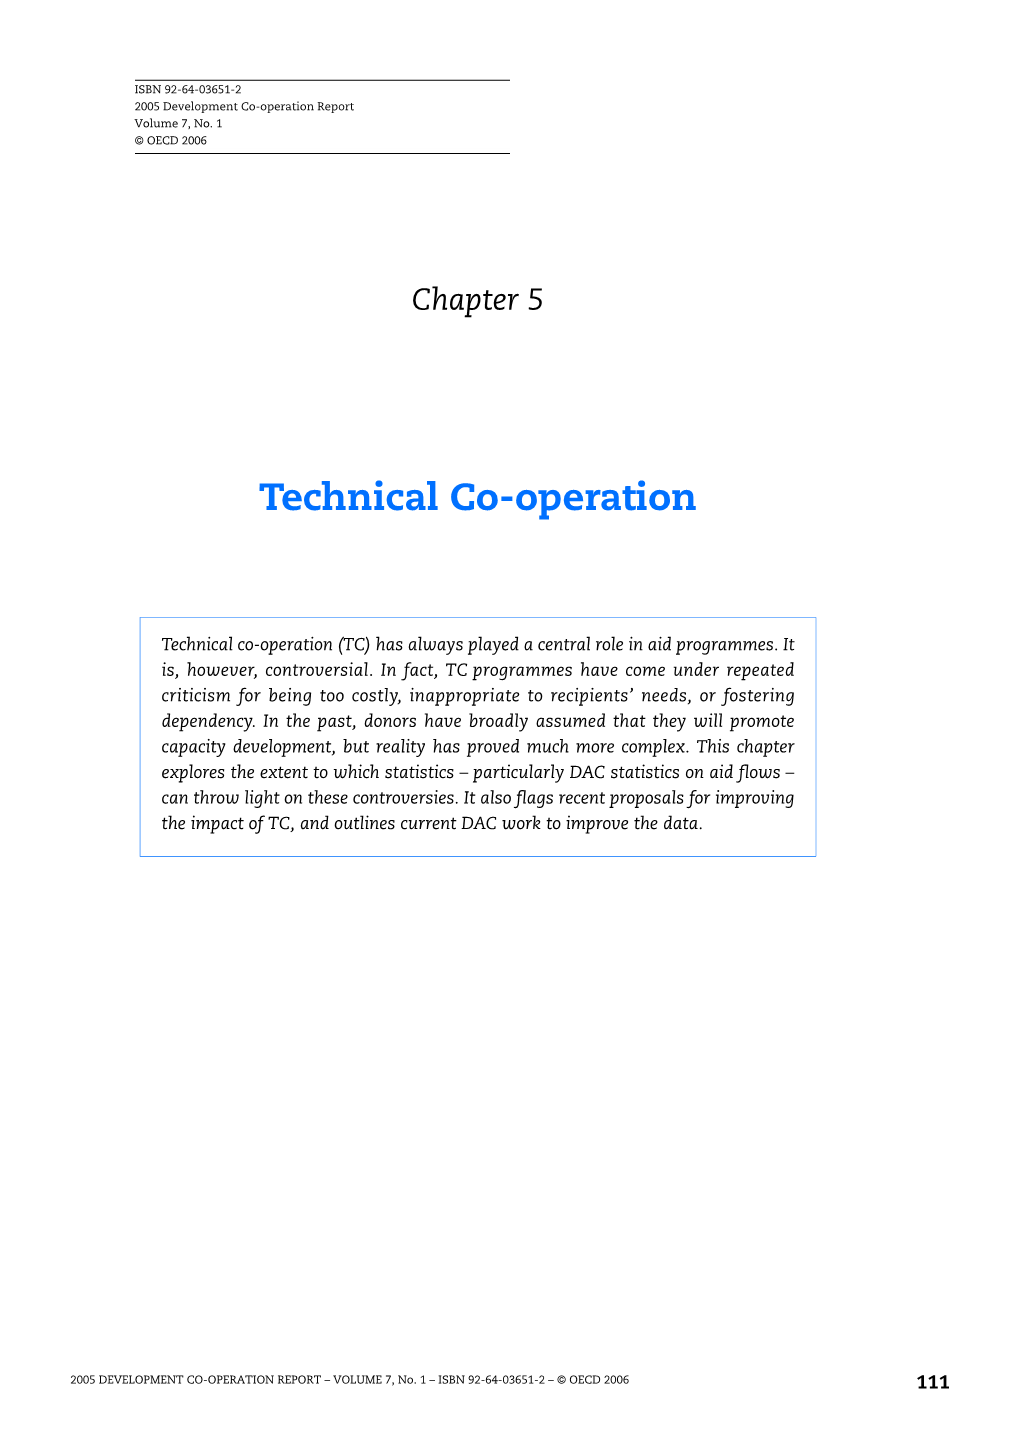 Technical Co-Operation